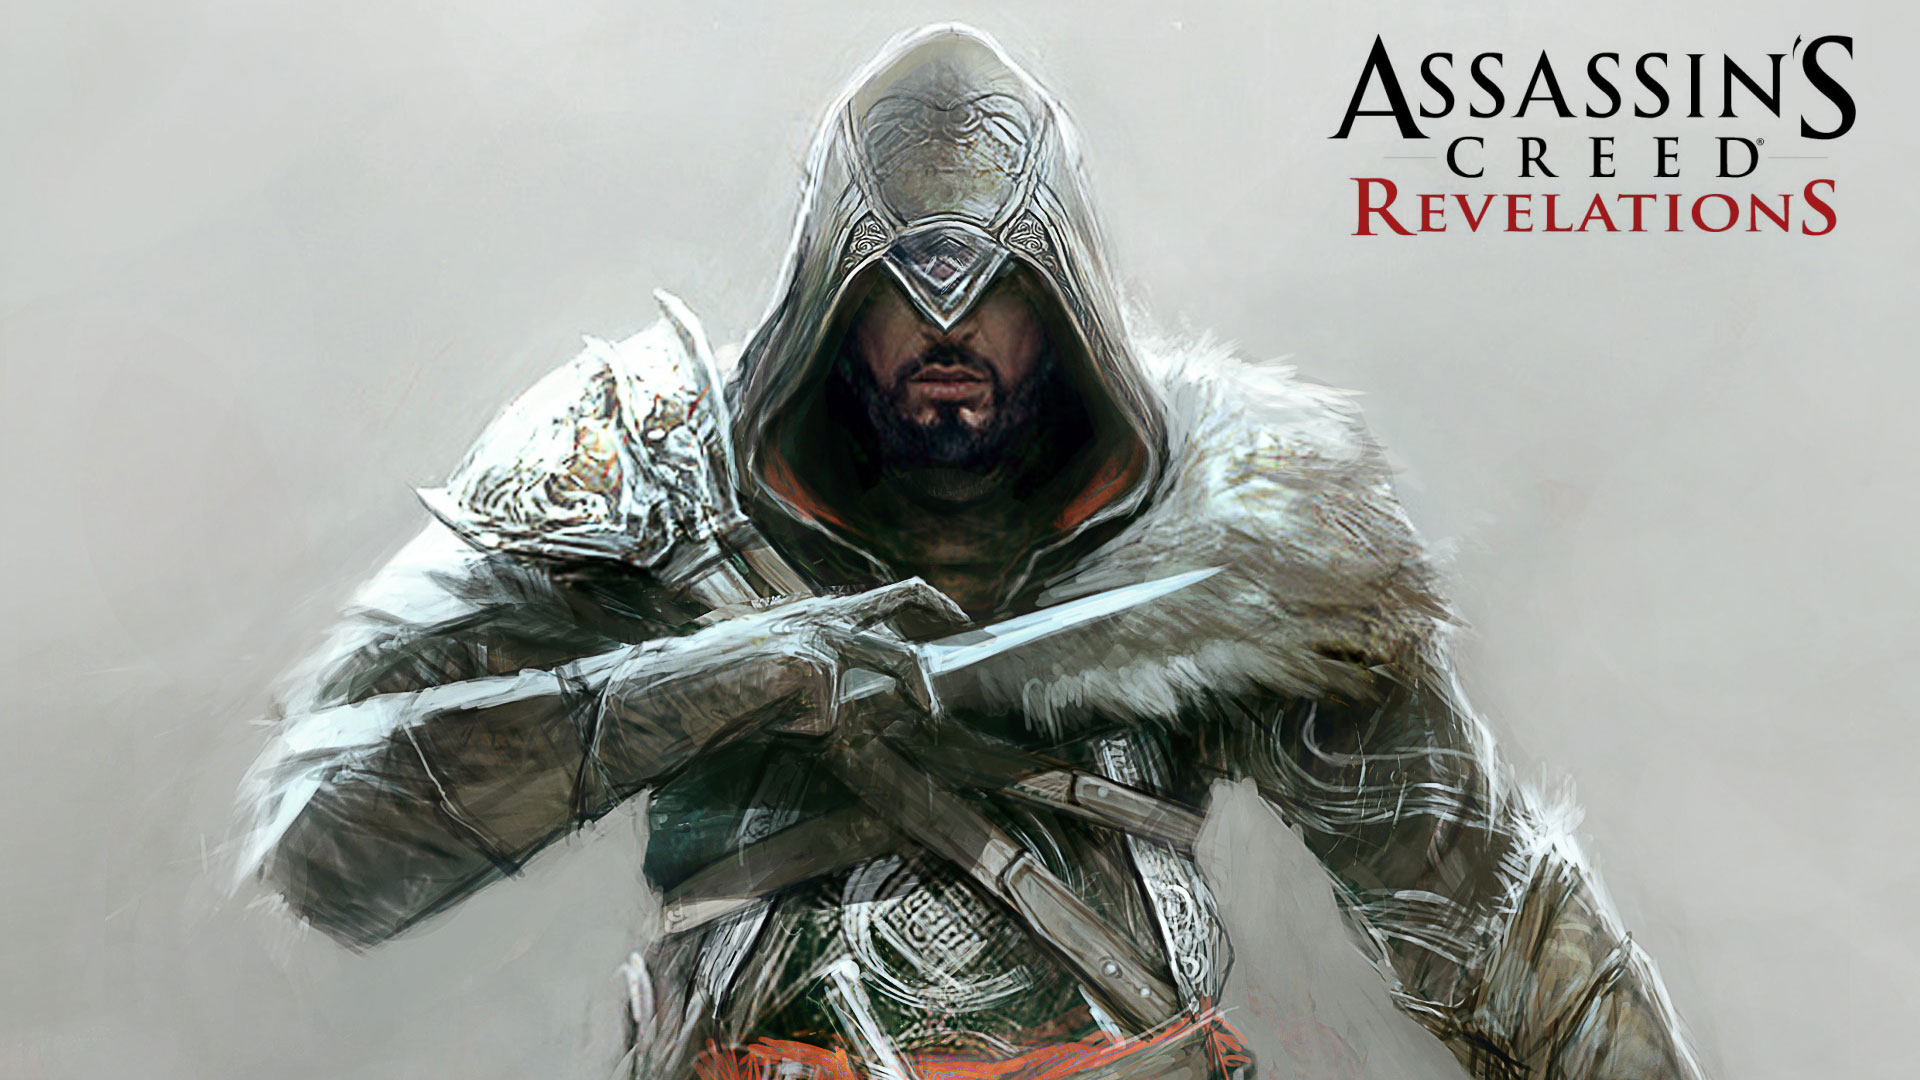 Assassins Creed Revelations Wallpapers in HD Page 3 1920x1080